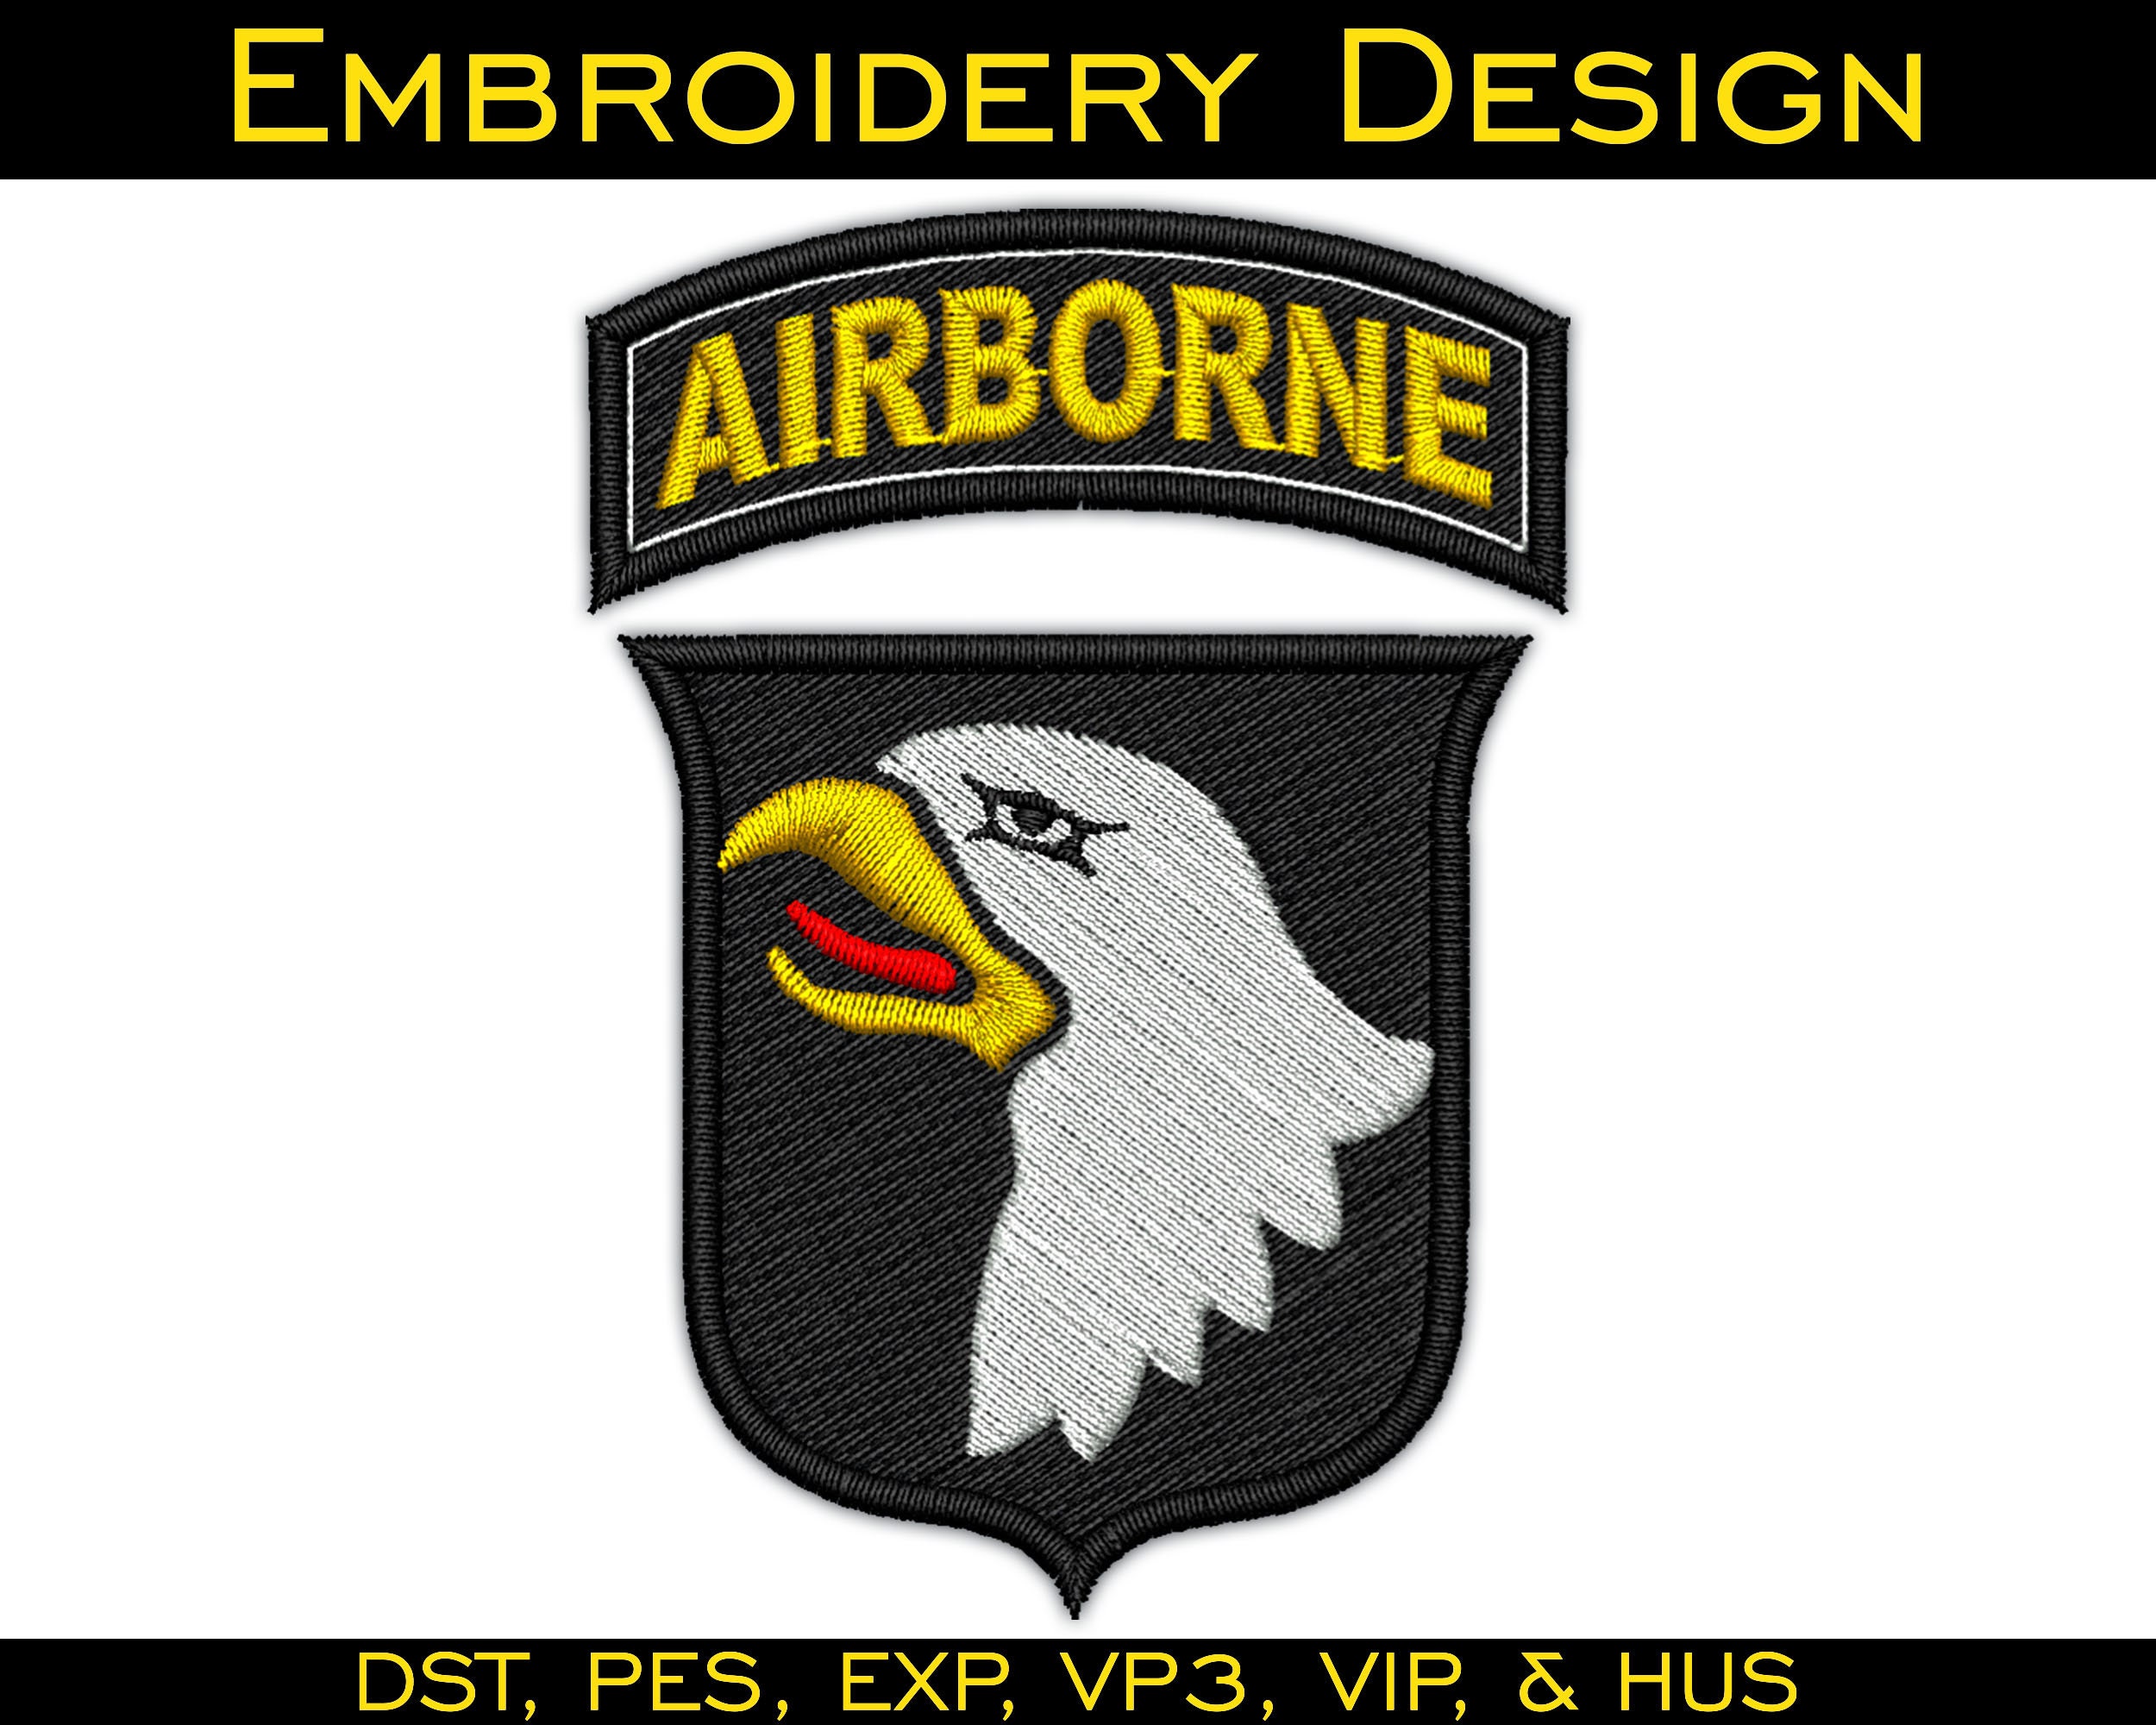 Buy Army Military Patches Embroidery iron on sewing Flag American Air force  Army Badges Online - 360 Digitizing - Embroidery Designs